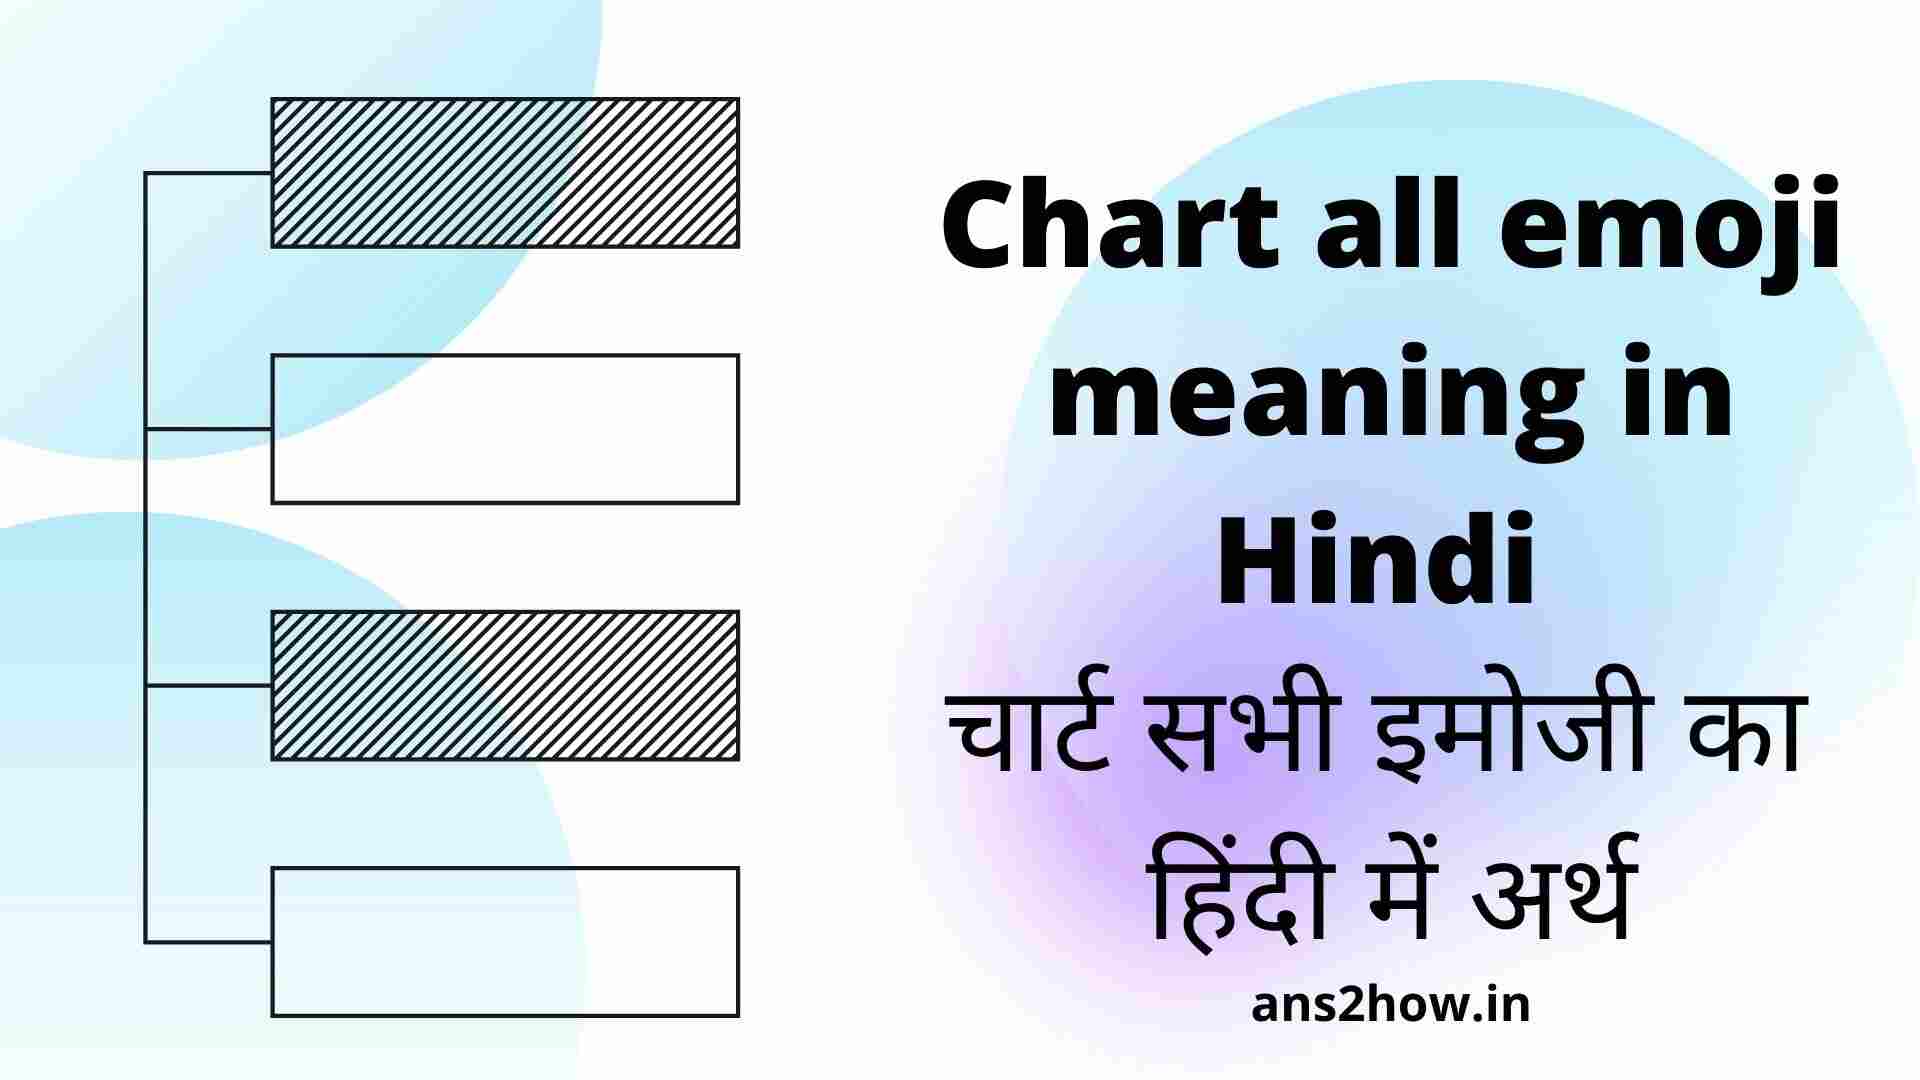 chart all emoji meaning in hindi